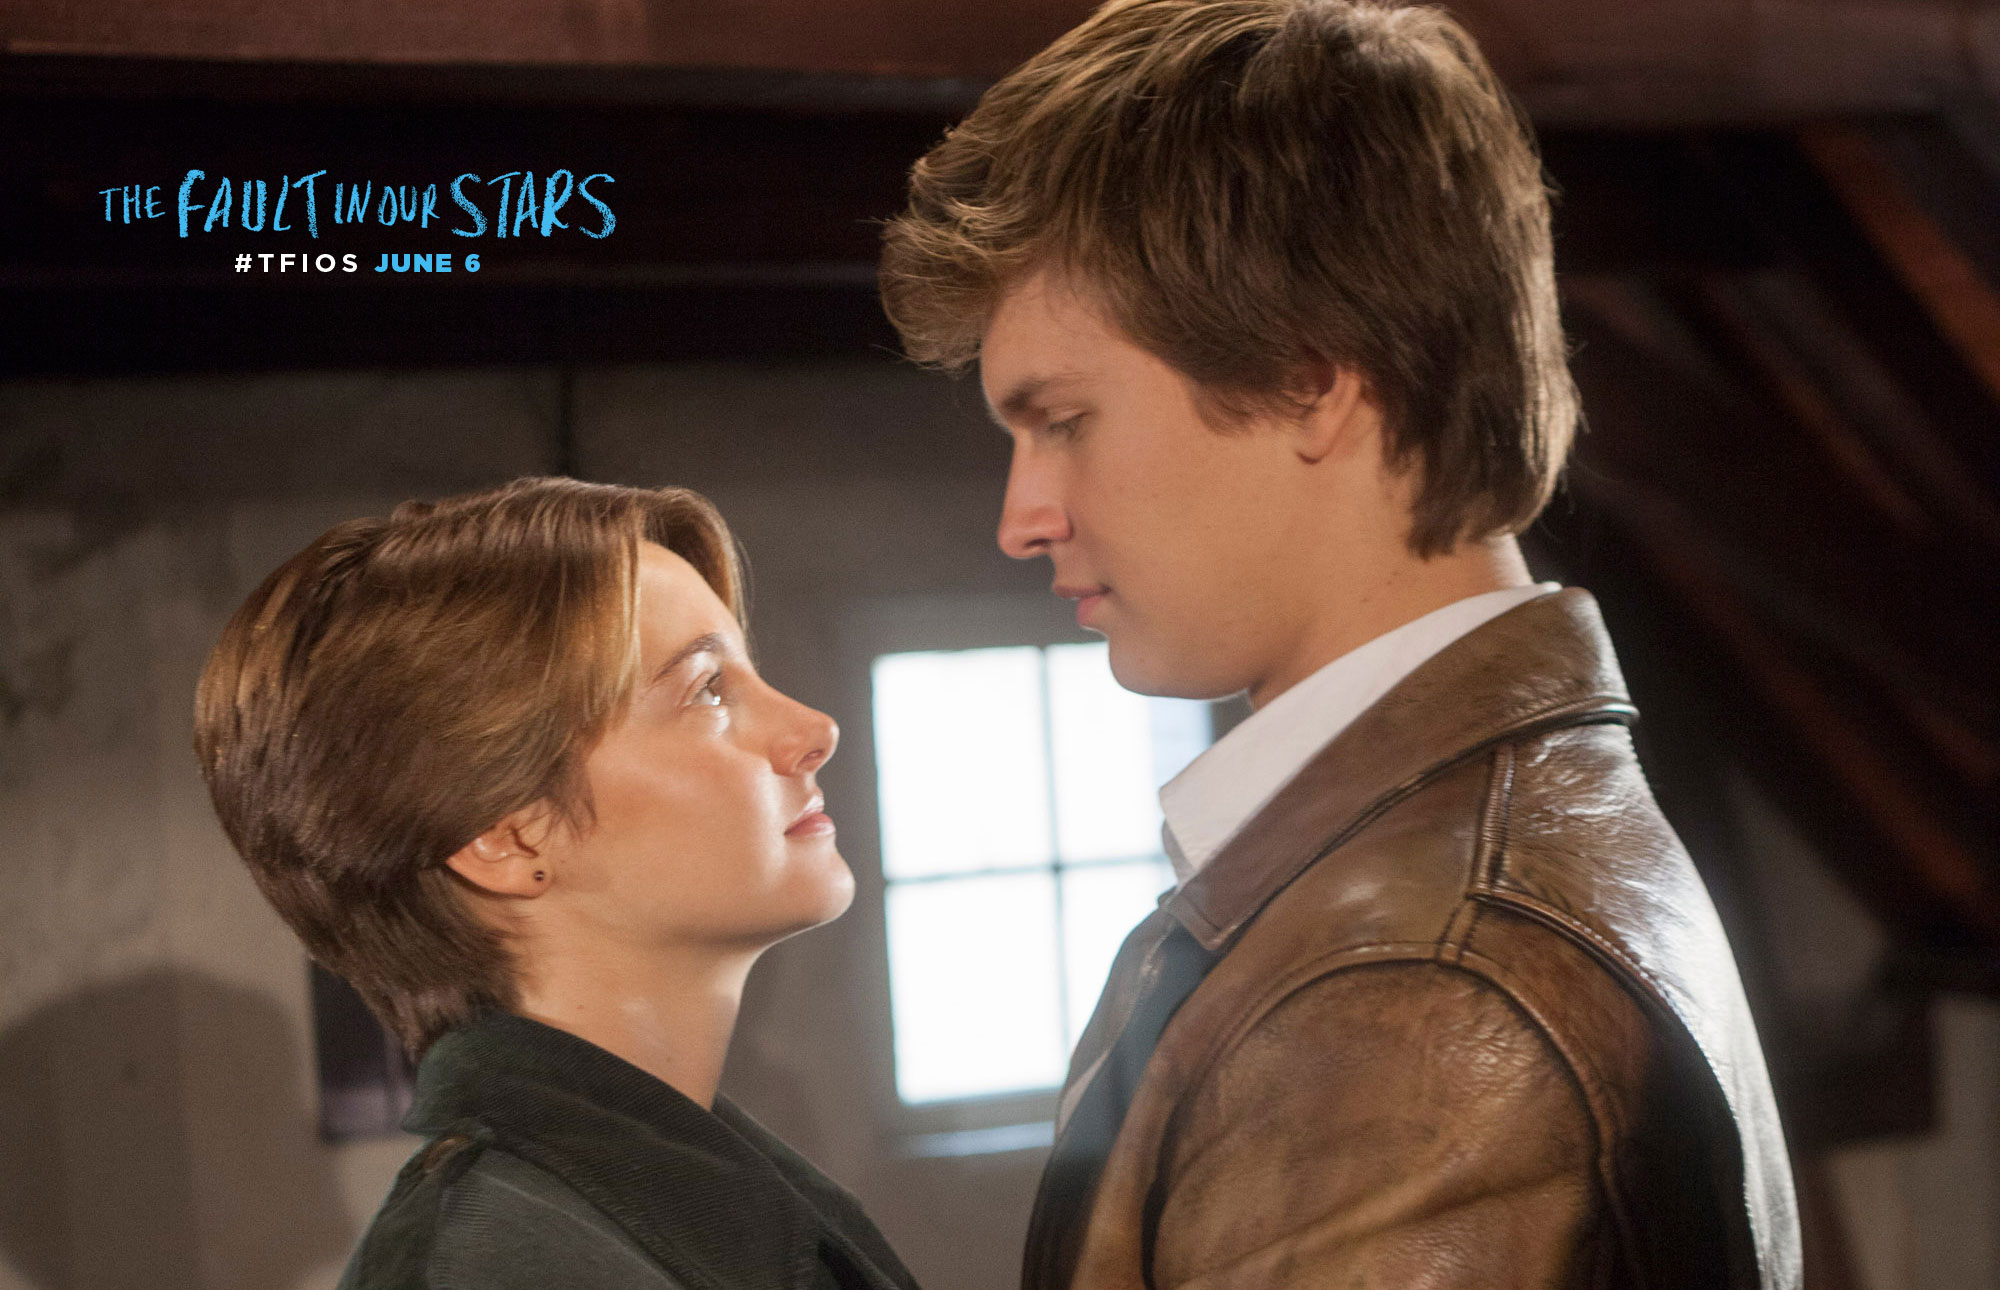 where to watch the fault in our stars